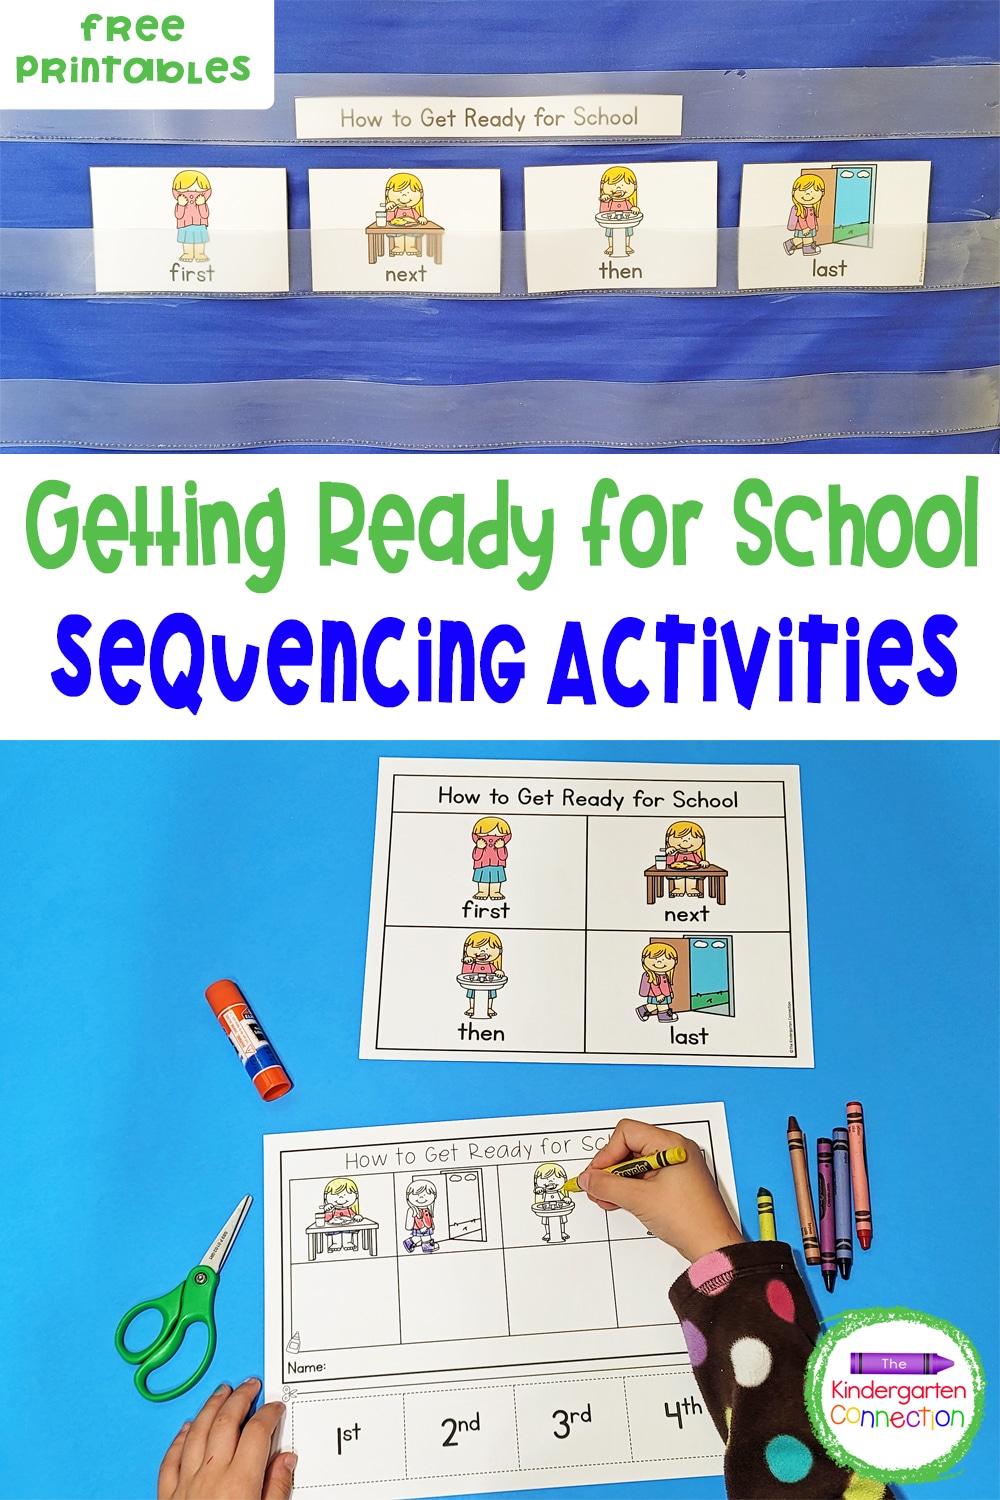 These free "Getting Ready for School" Sequencing Activities will help your students work on sequencing as well as scissor skills!